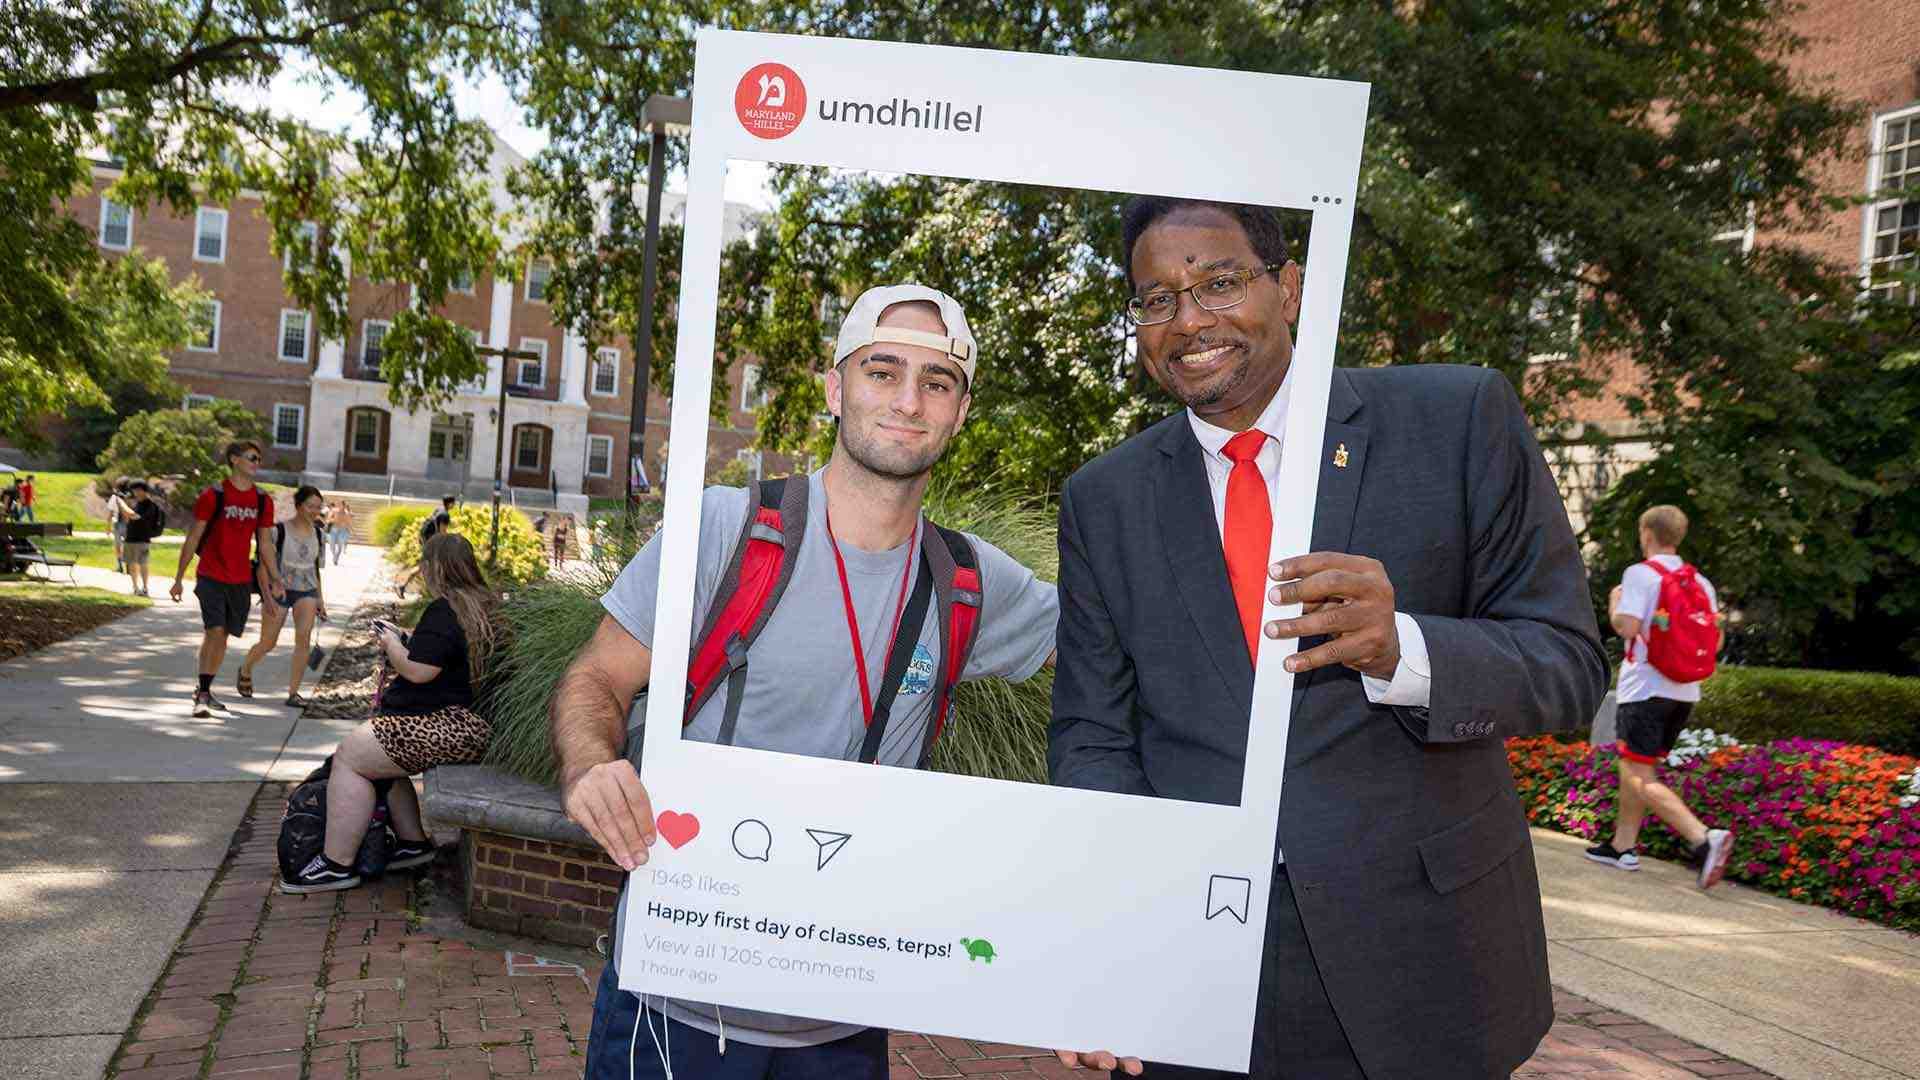 Pines poses with student in frame that says, "umdhillel: Happy first day of classes, Terps!"